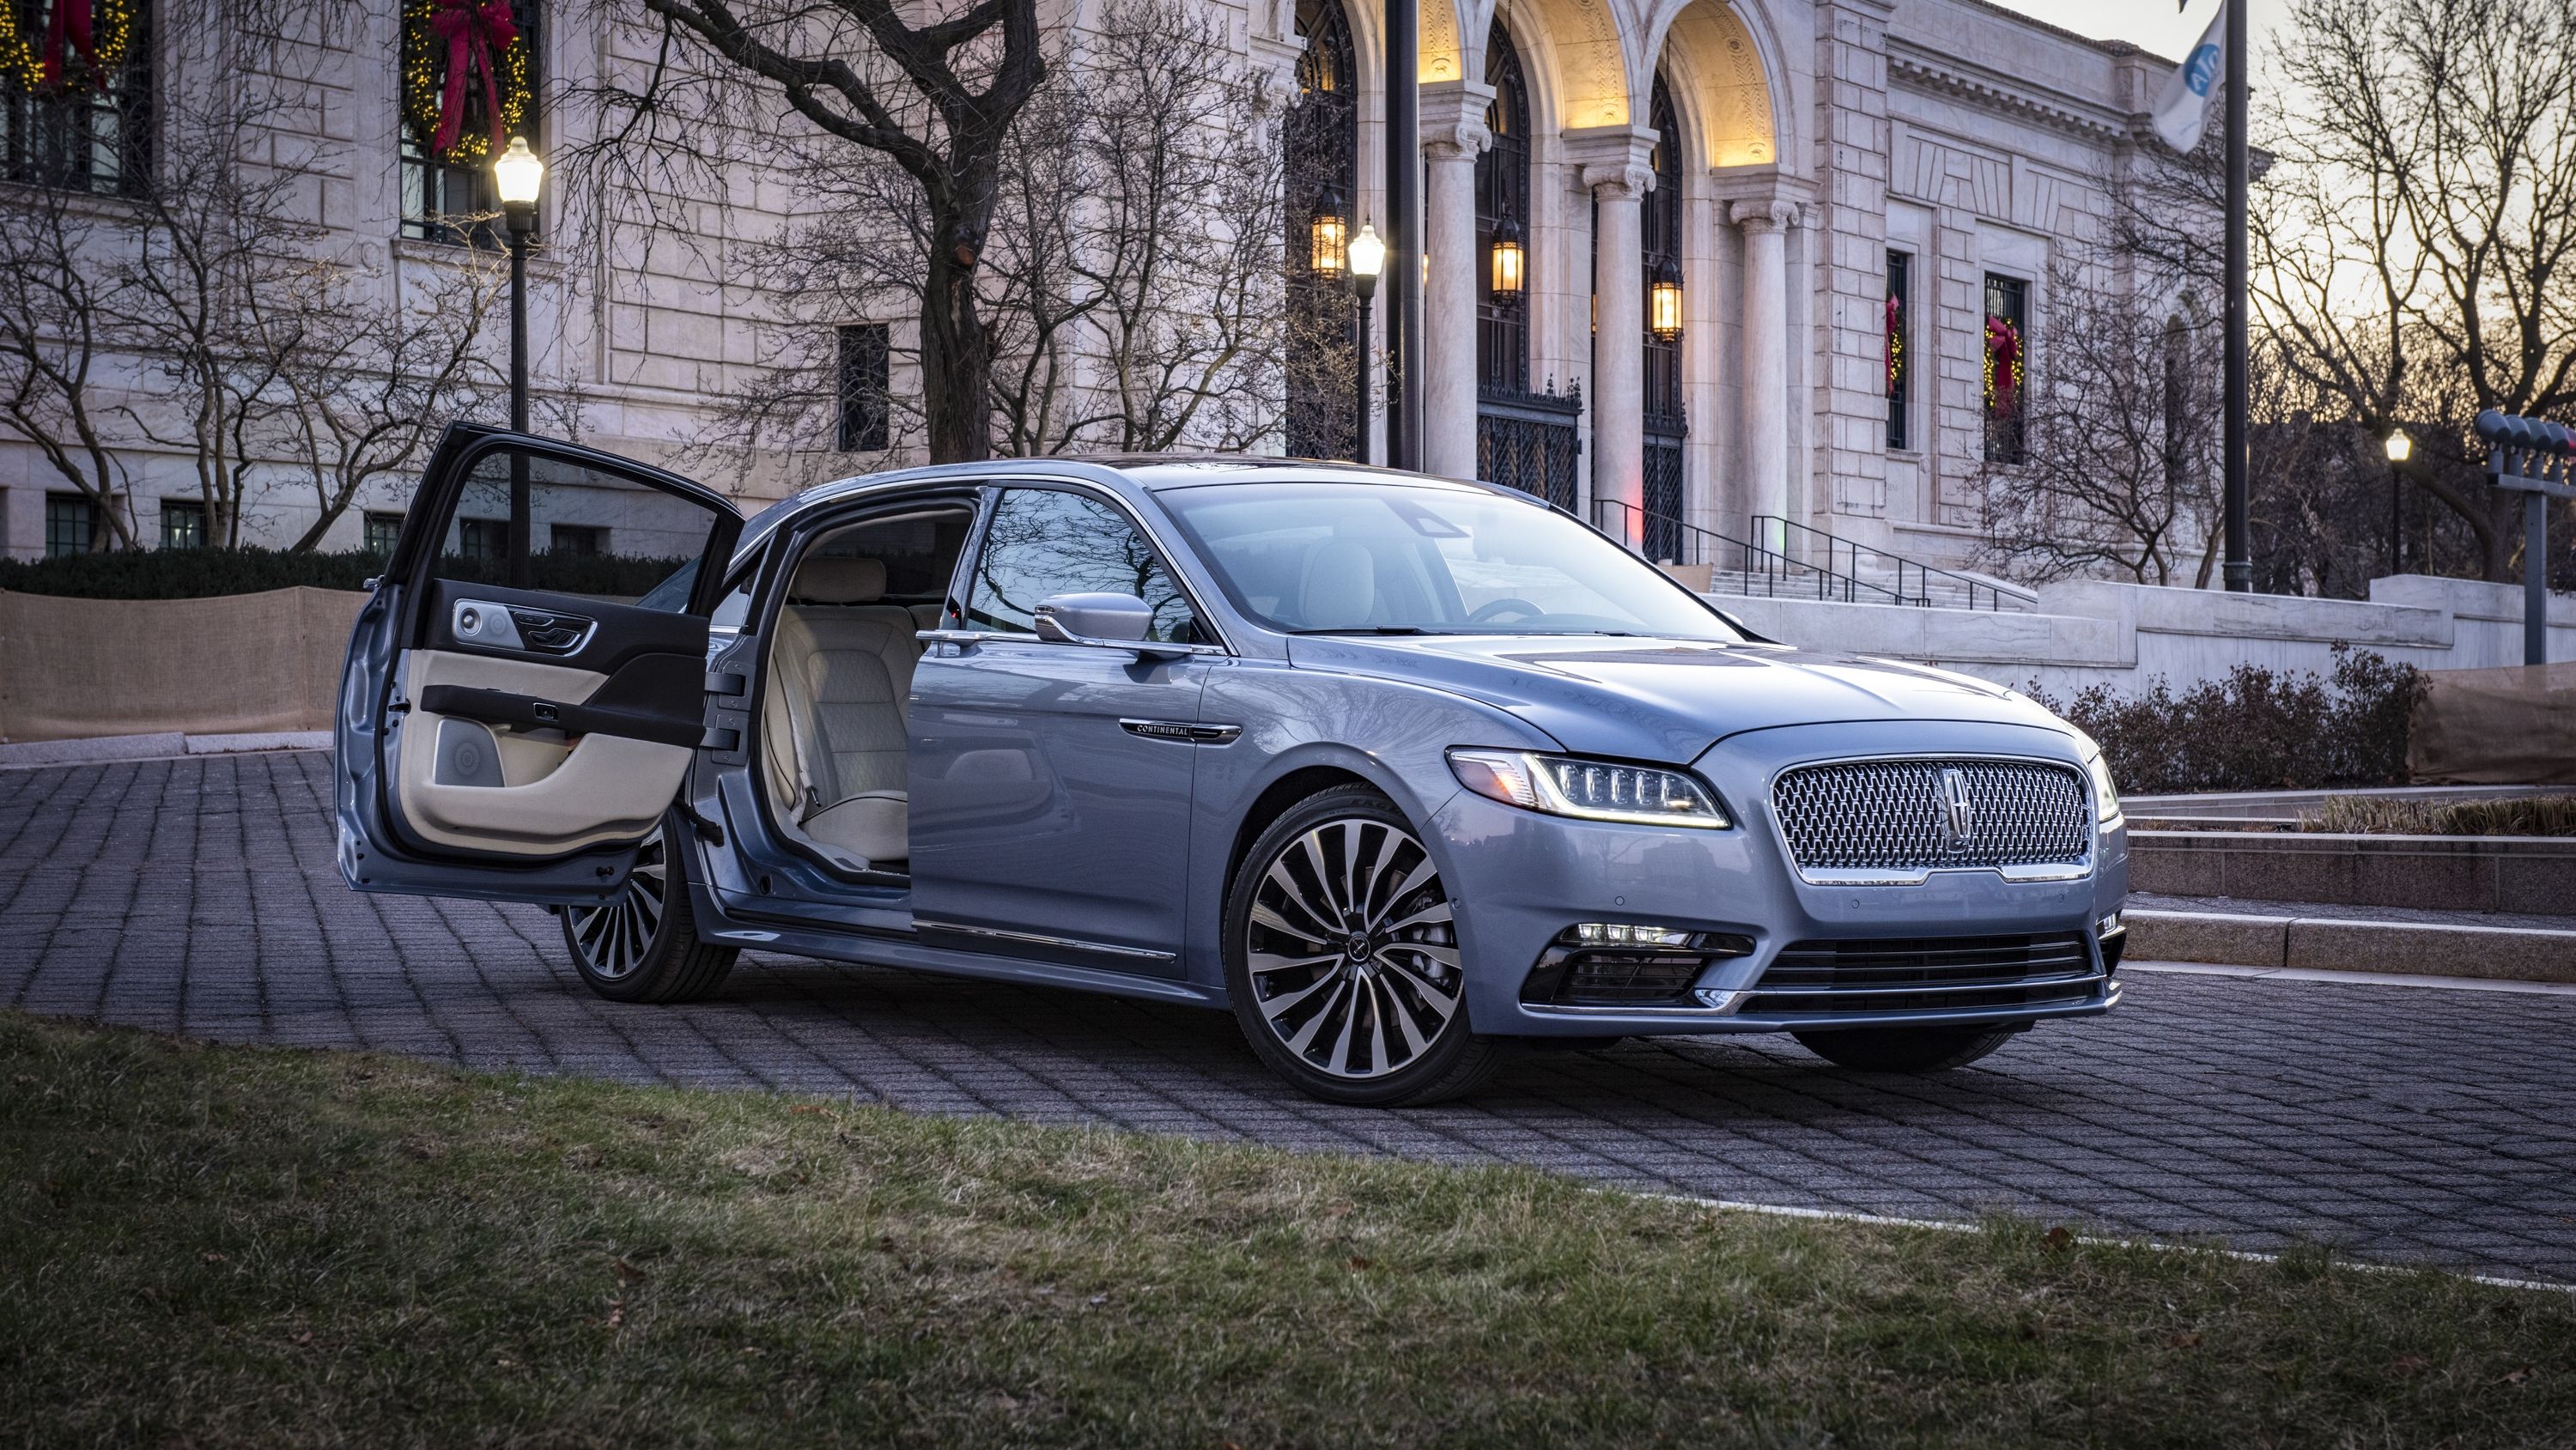 2018 - 2019 7 Little-Know Facts About The 2019 Lincoln Continental Coach Door Edition